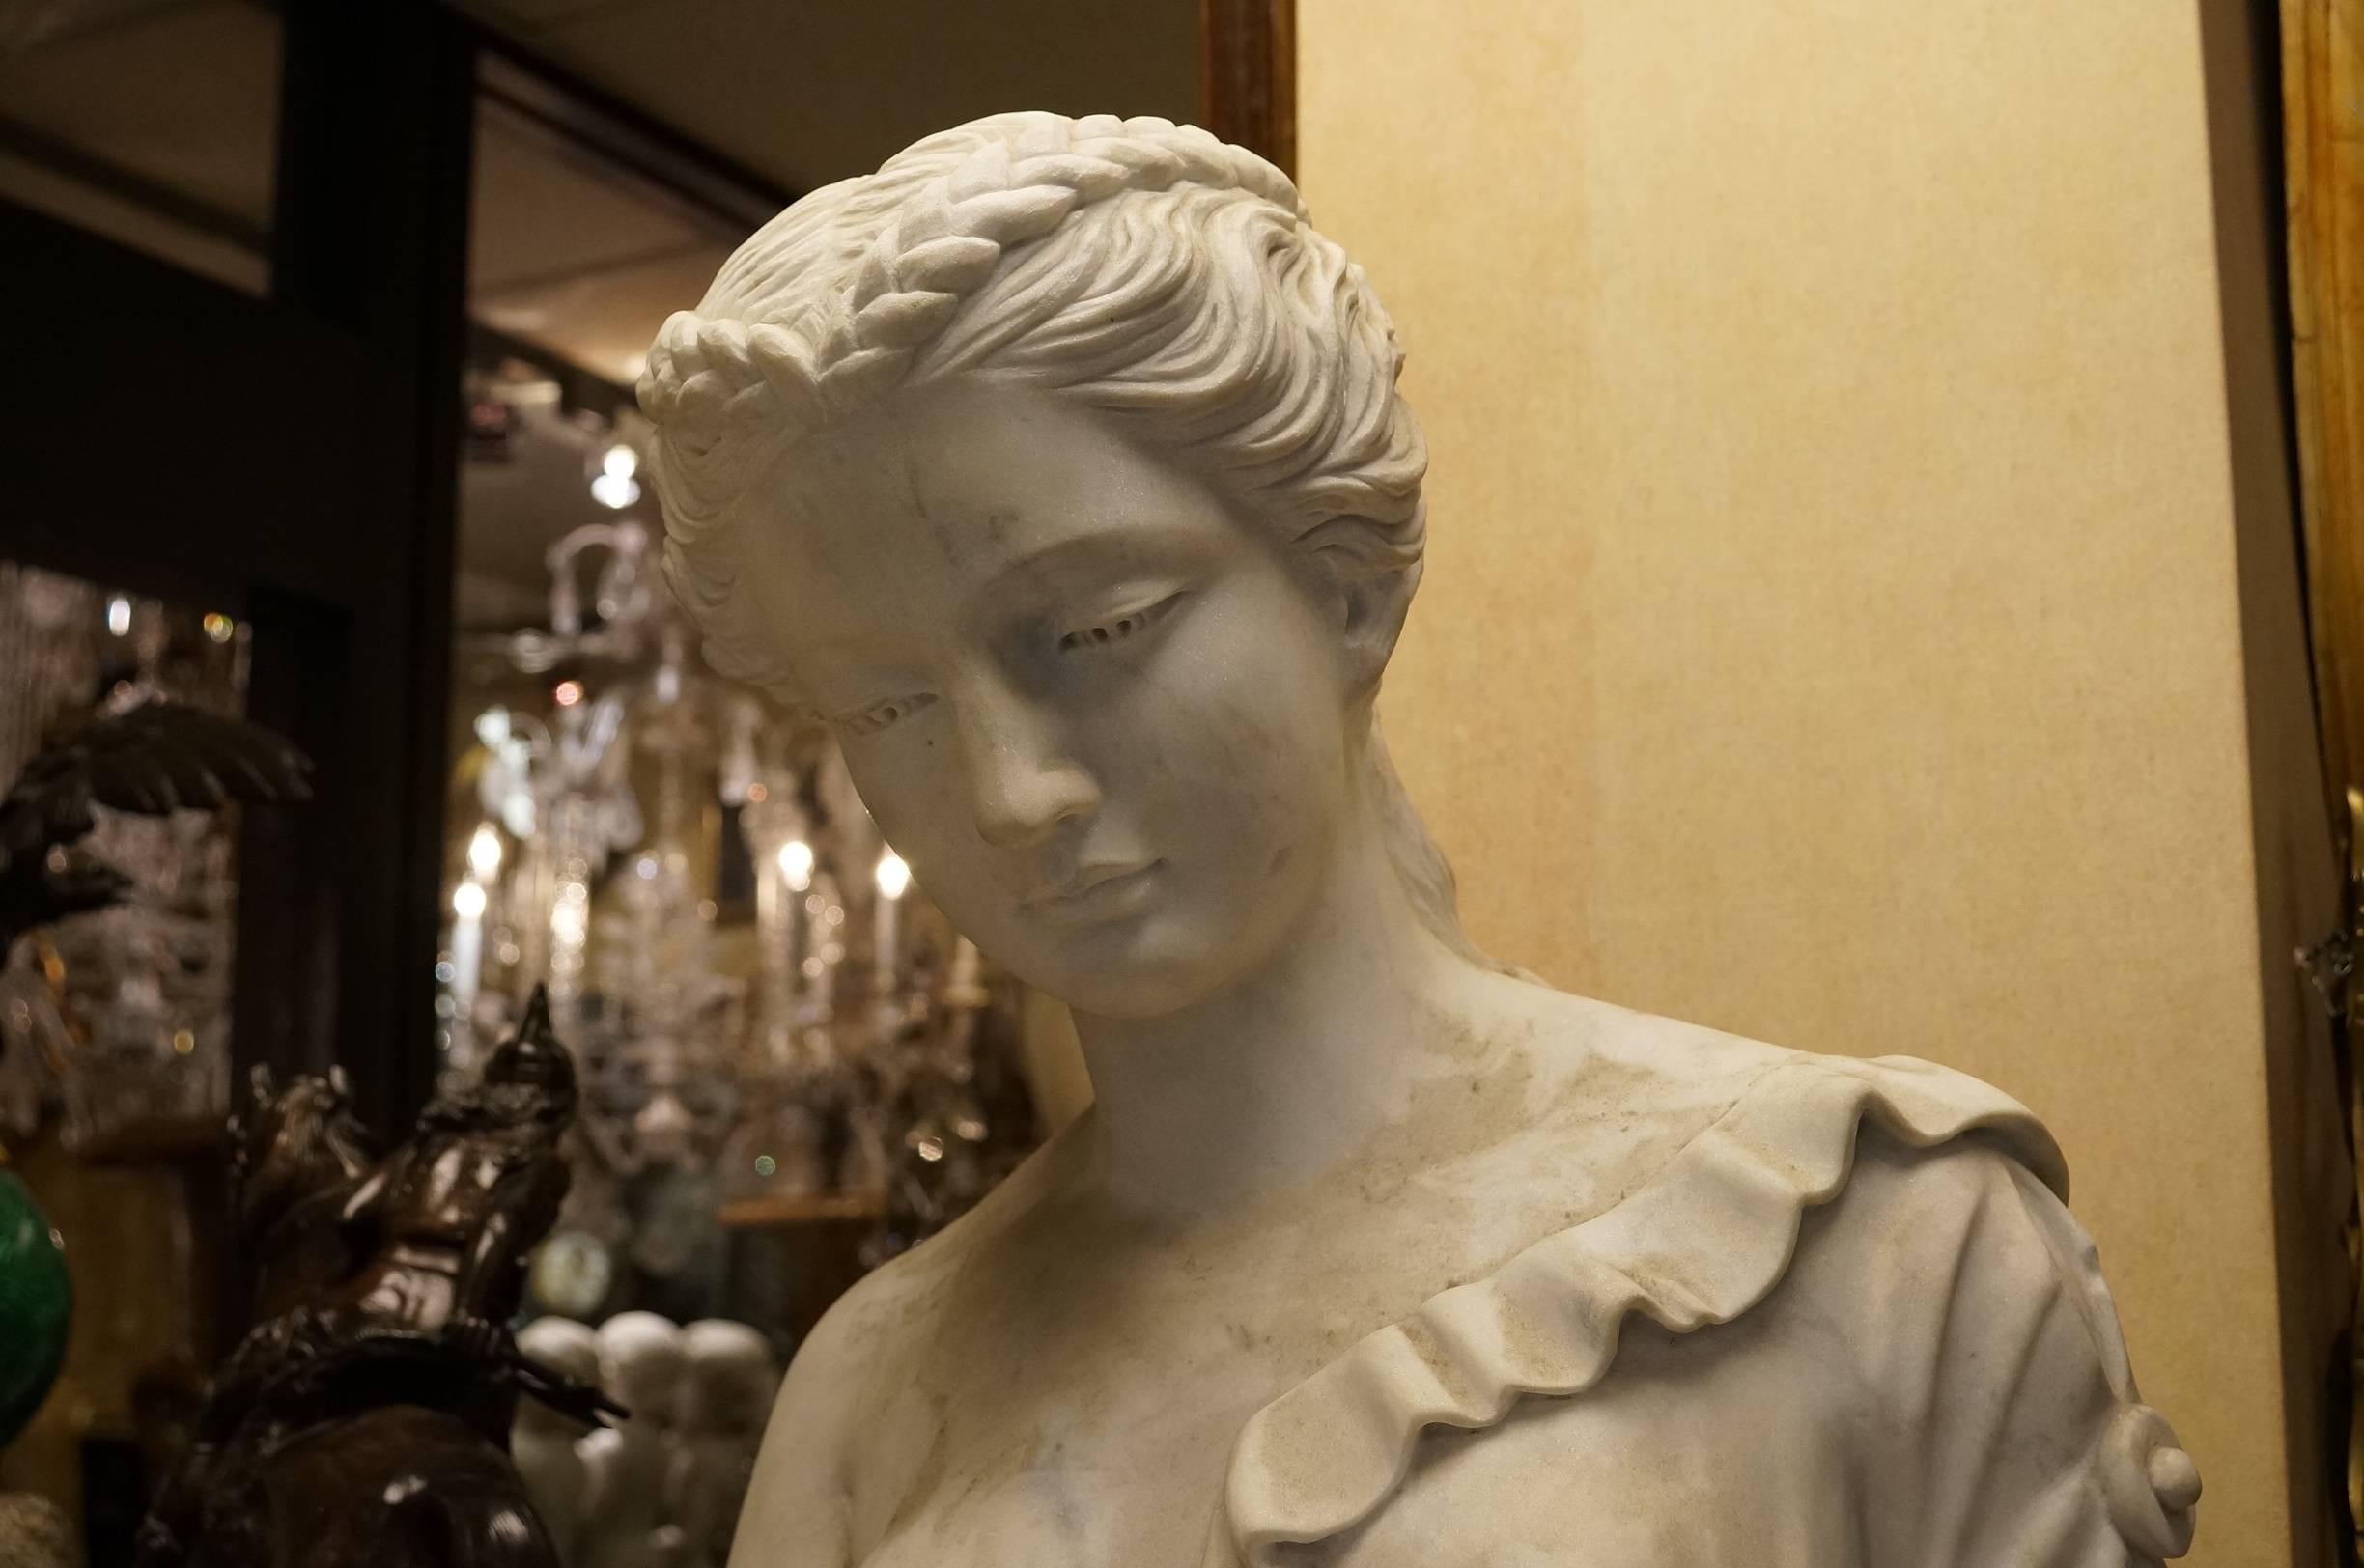 life size marble statues for sale